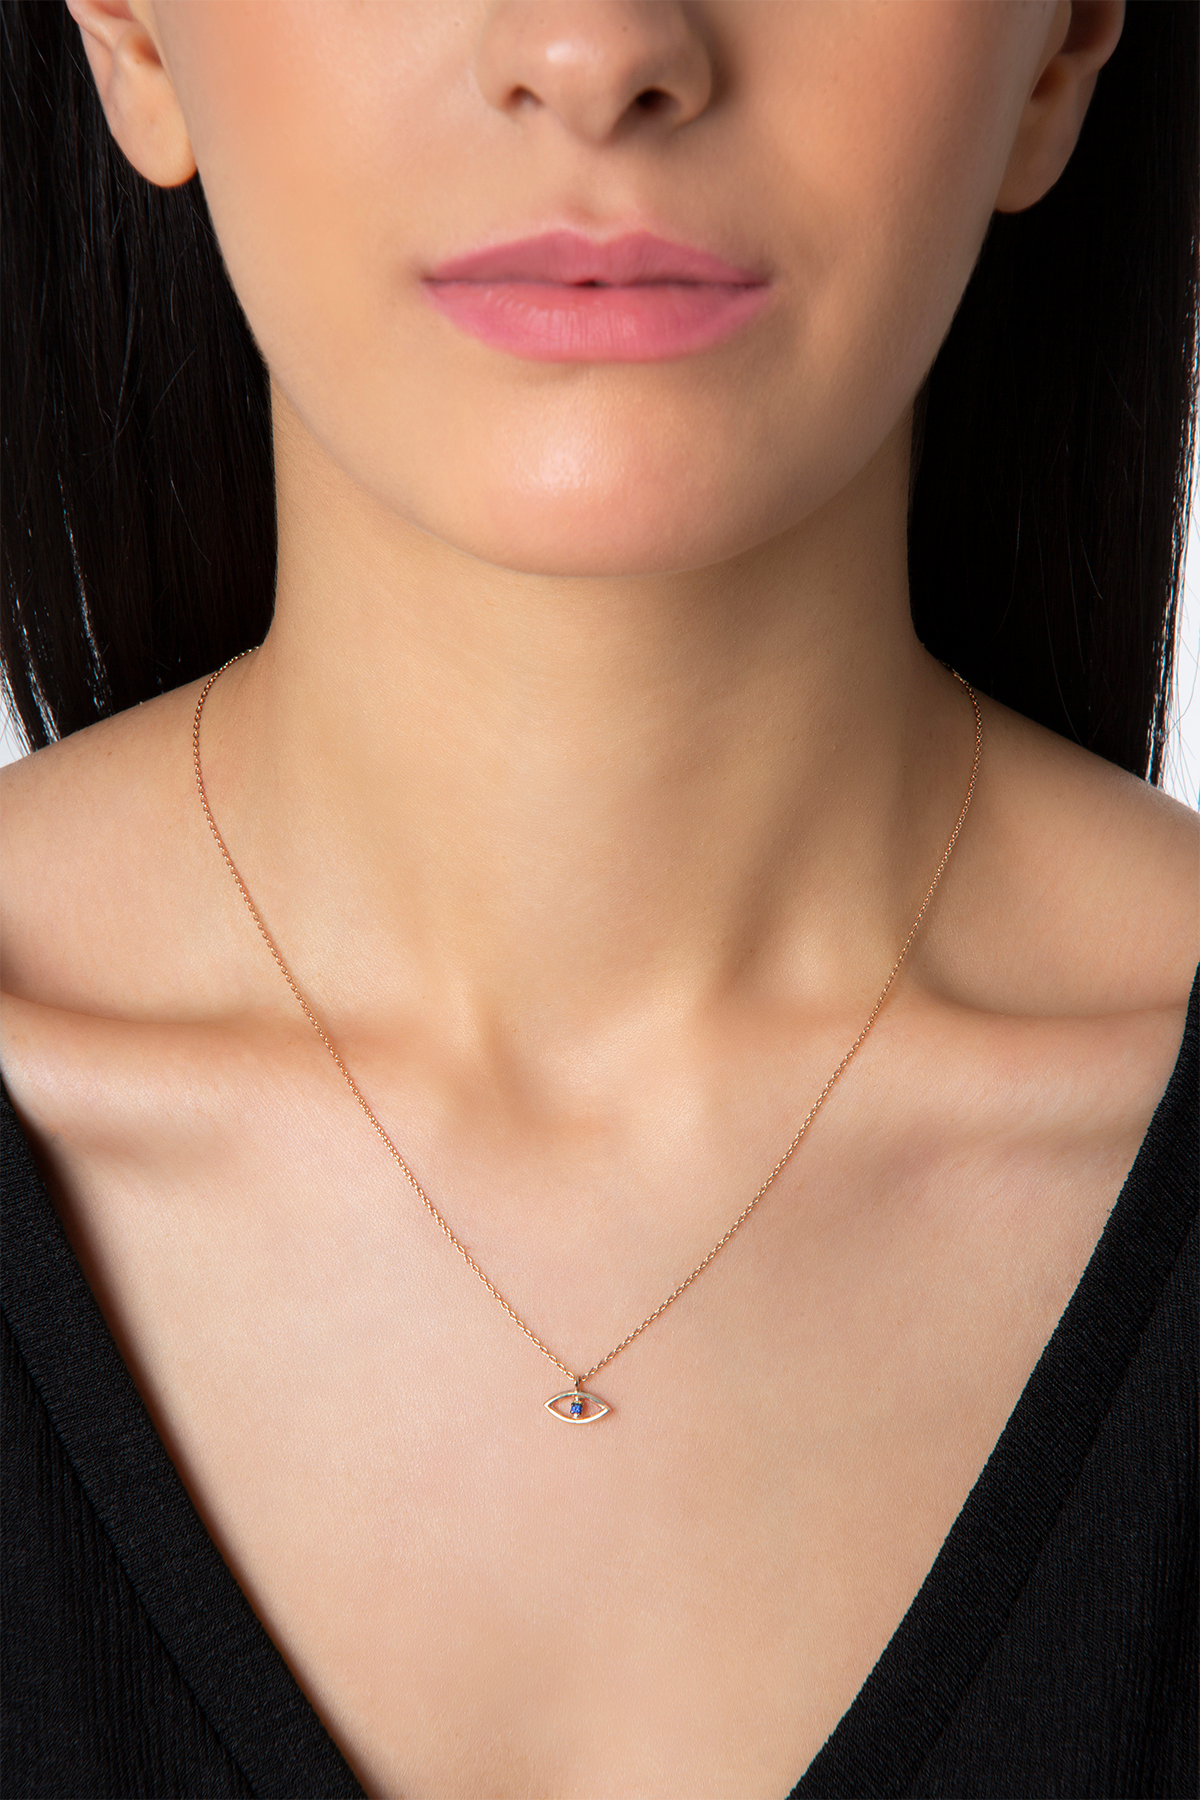 Mini Pure Magic Knot Necklace in Rose Gold - Her Story Shop